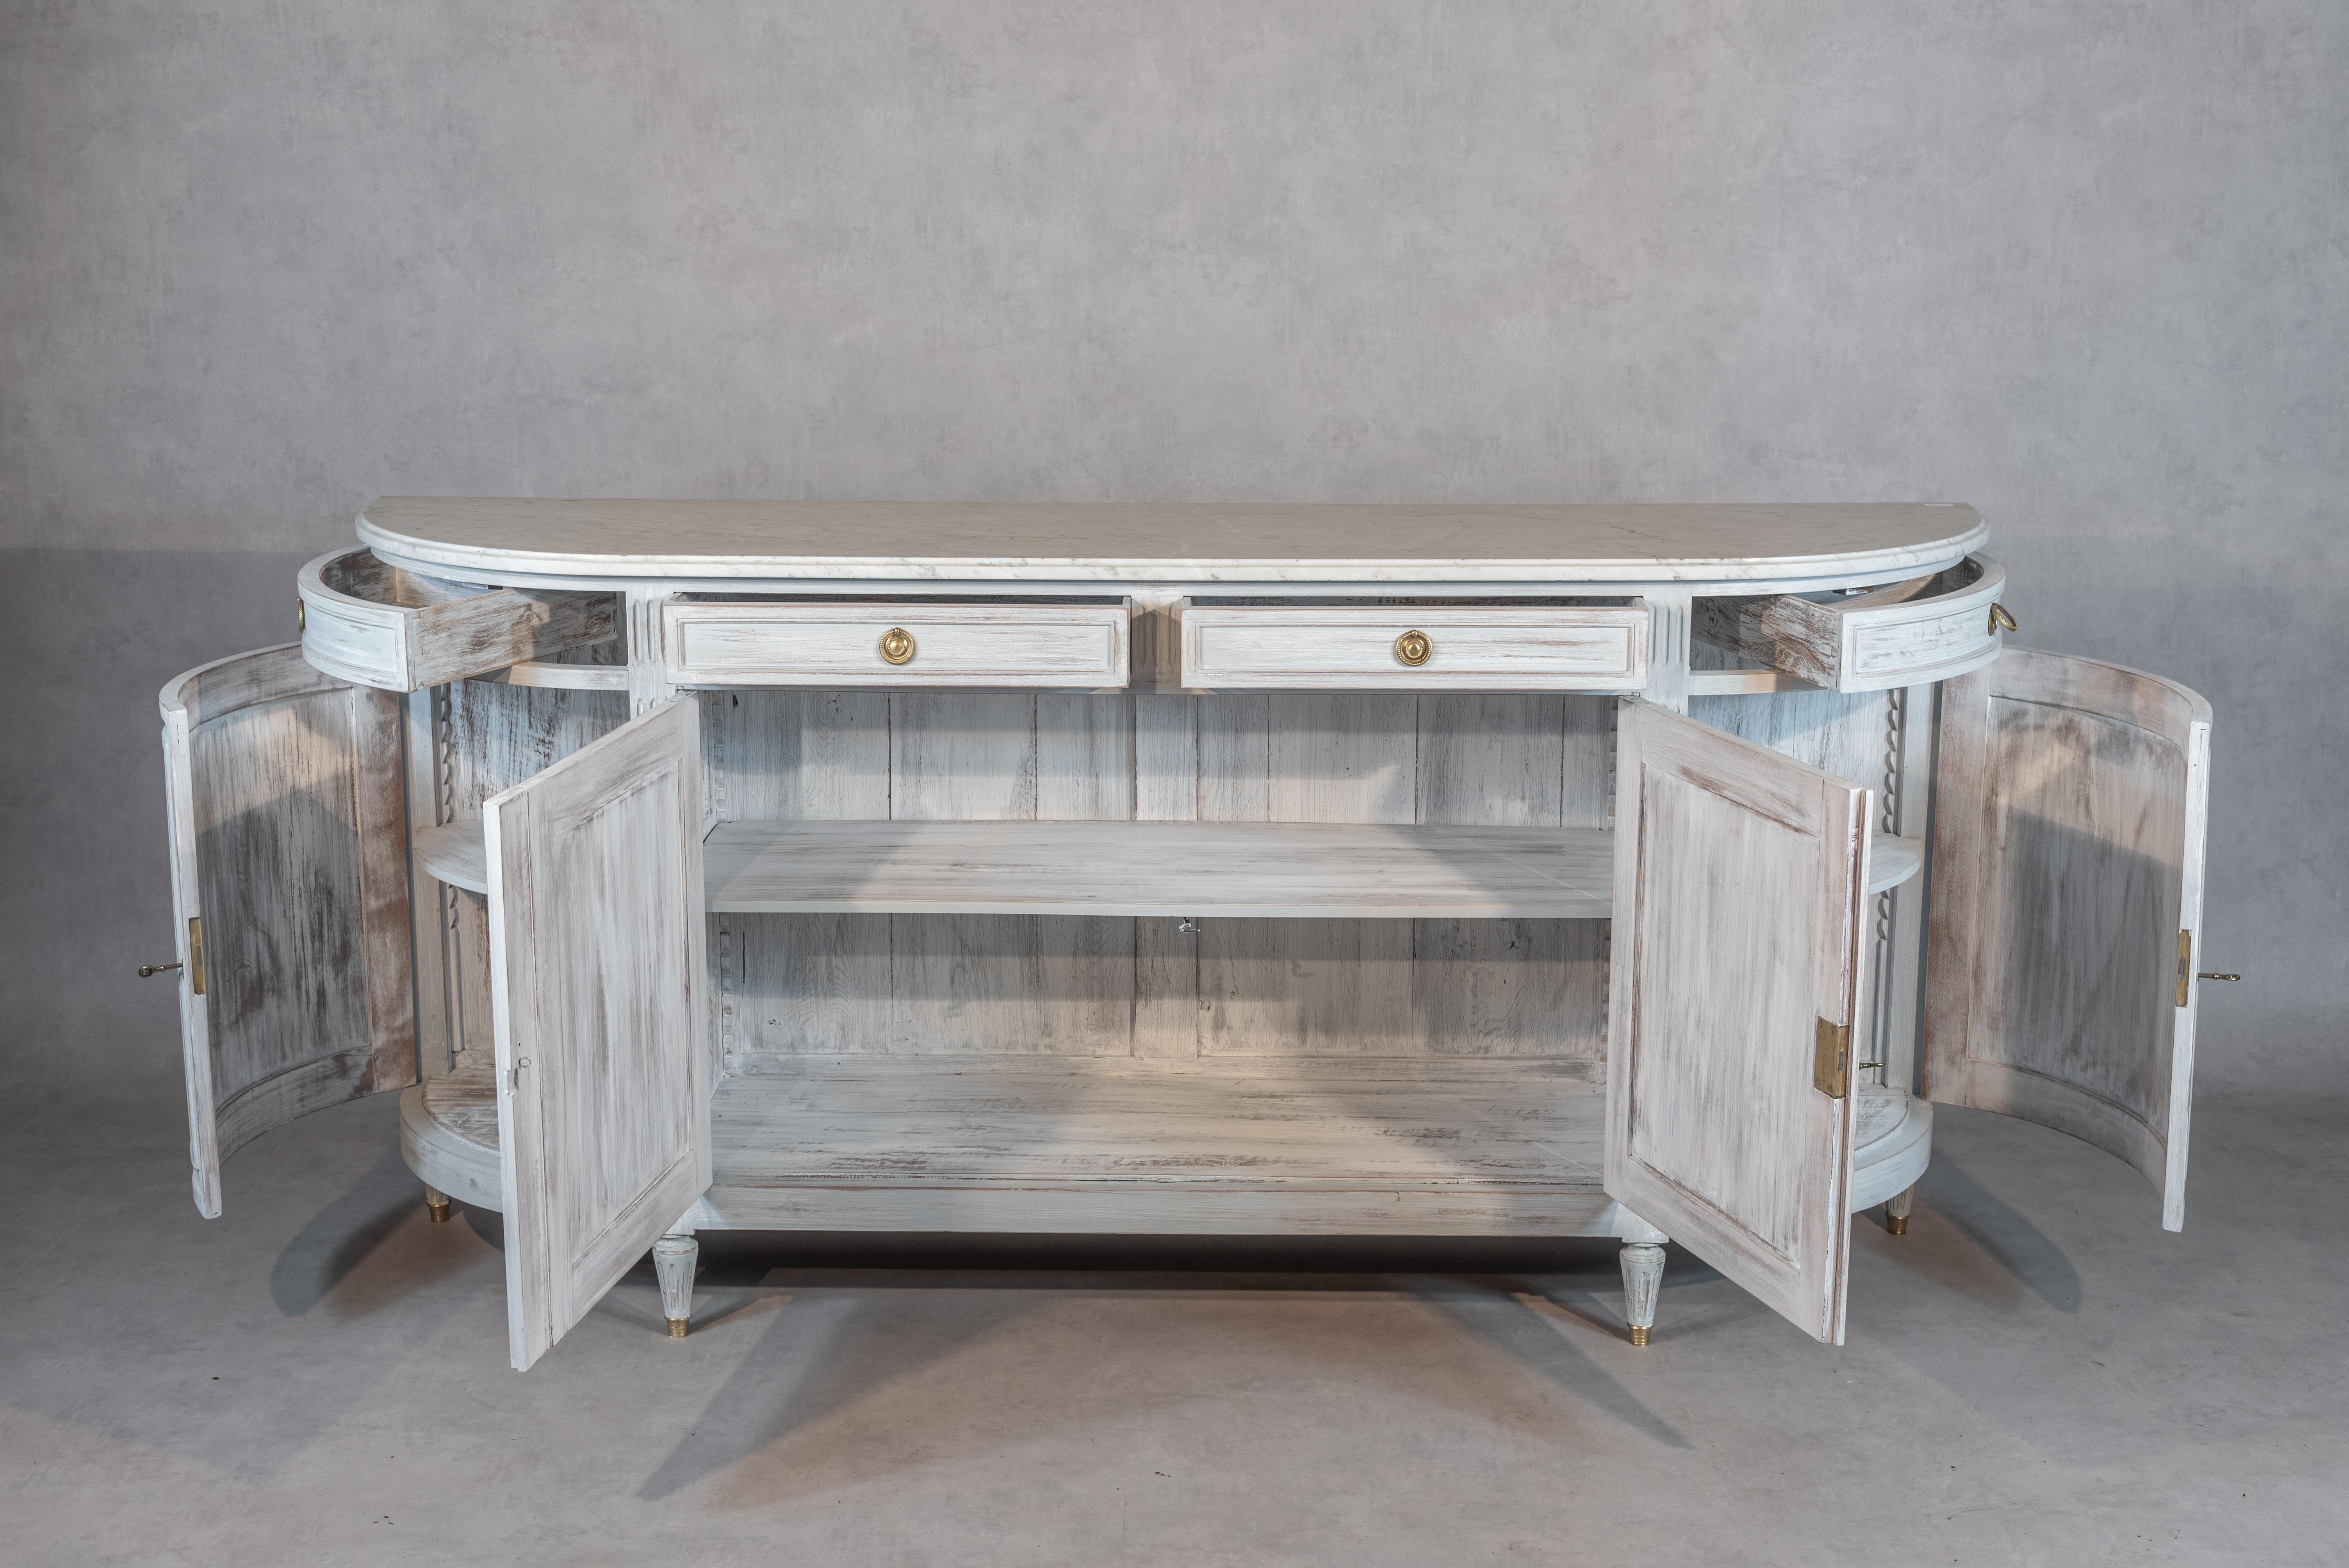 This stunning French Louis XVI style enfilade from the Mid-20th Century is a true work of art. Meticulously refurbished to its former glory, this enfilade has been professionally sanded, bleached, and painted in a gorgeous white patina that